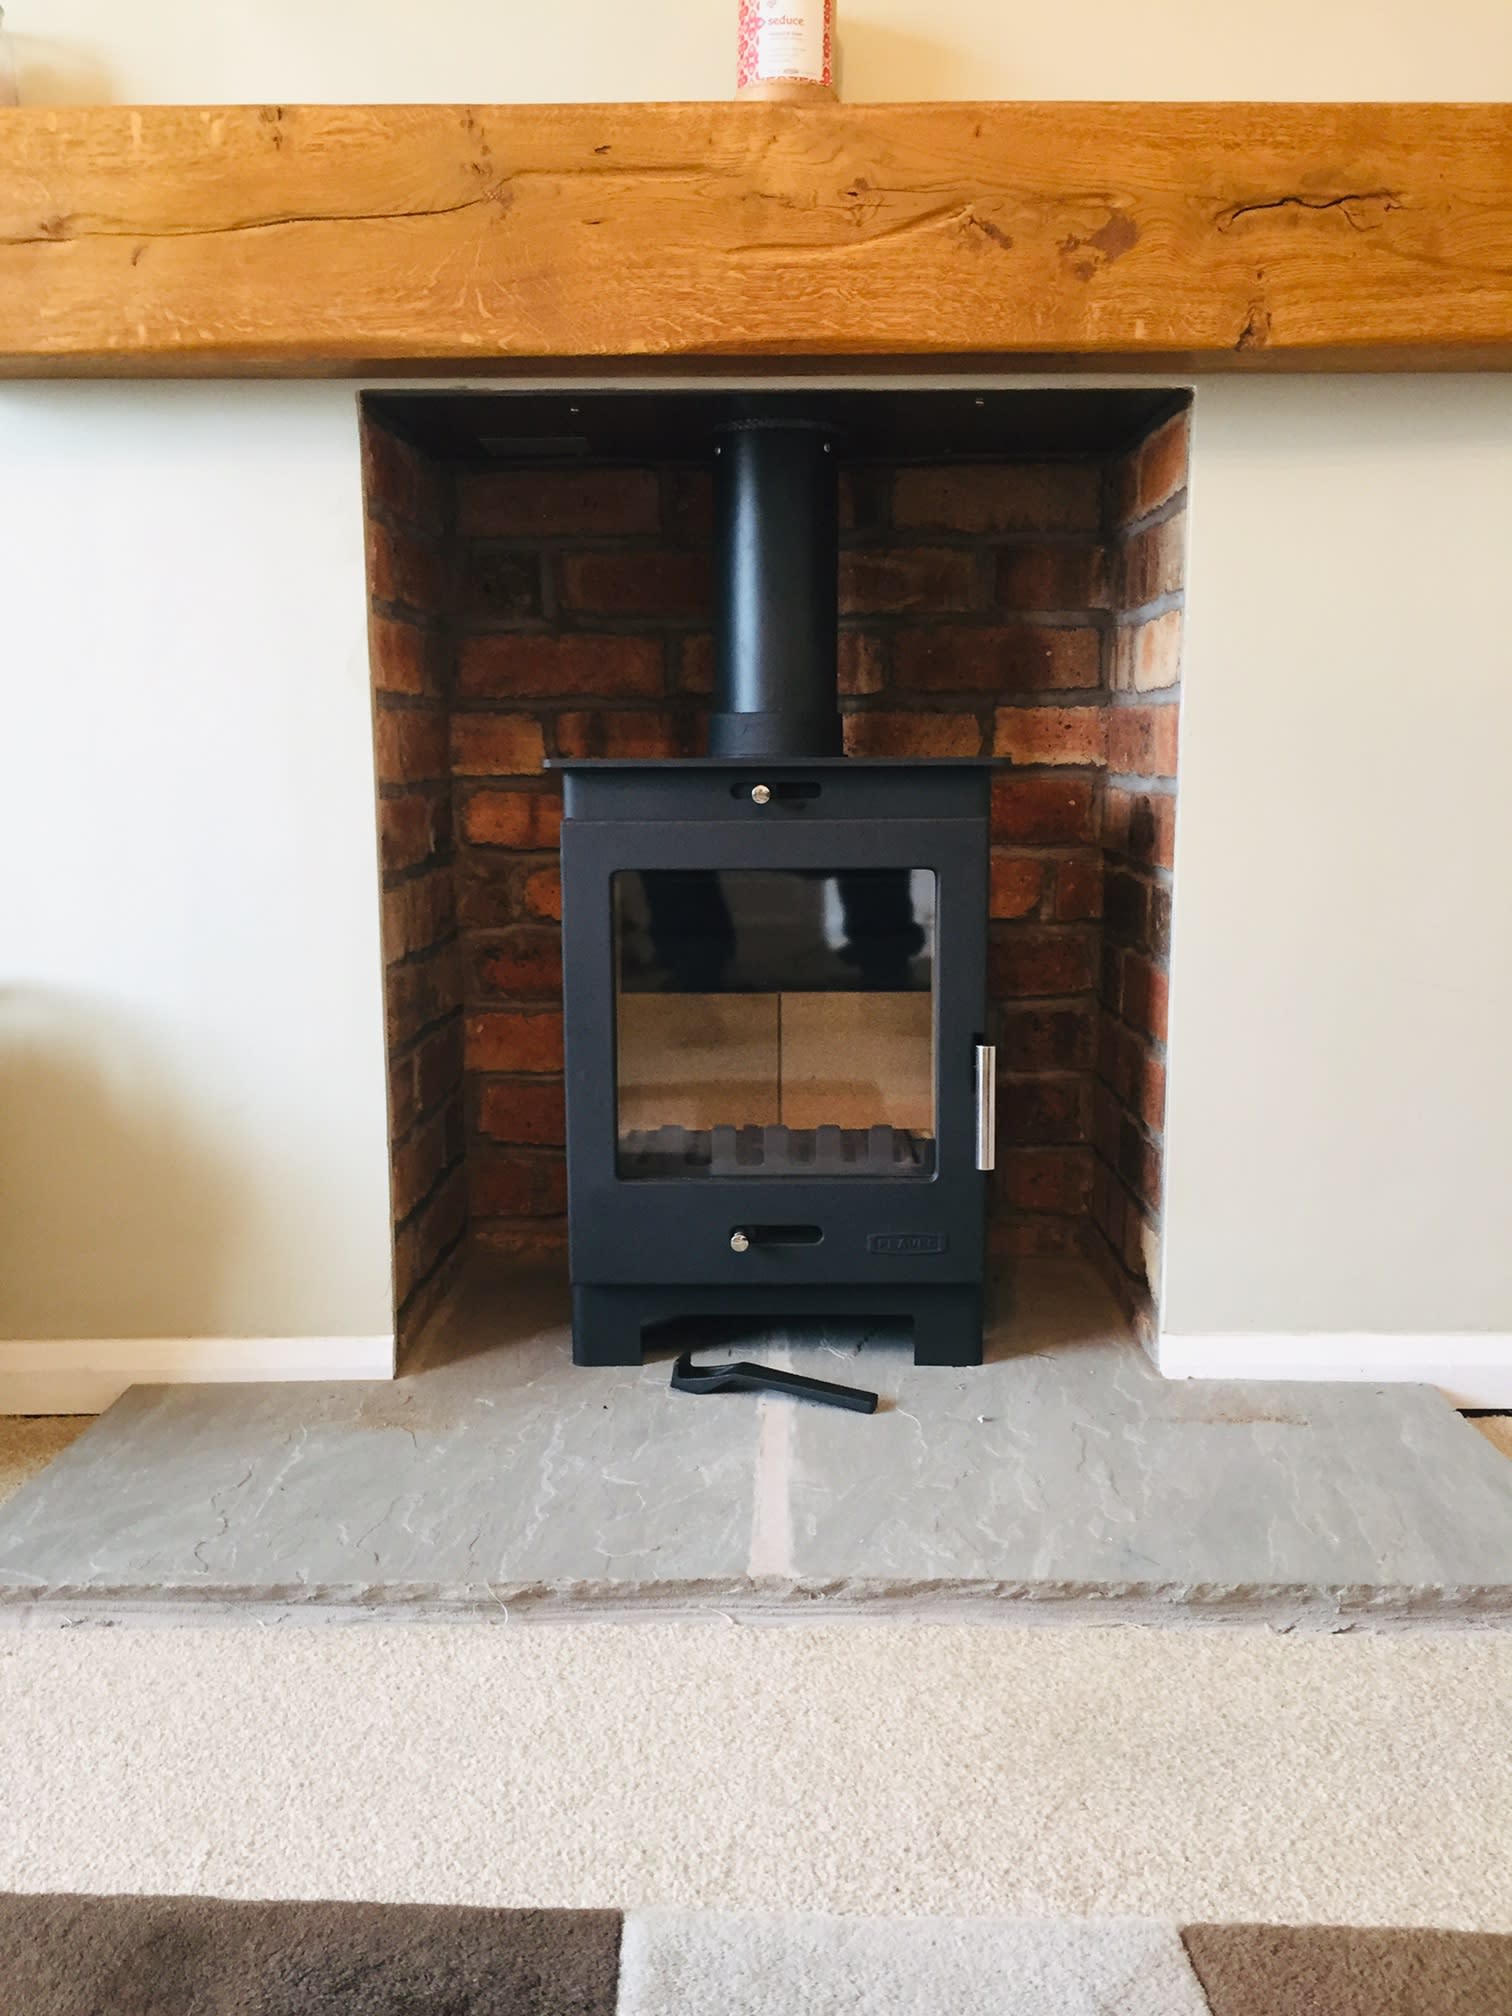 Images Chimney Sweep Fireplaces & Stoves